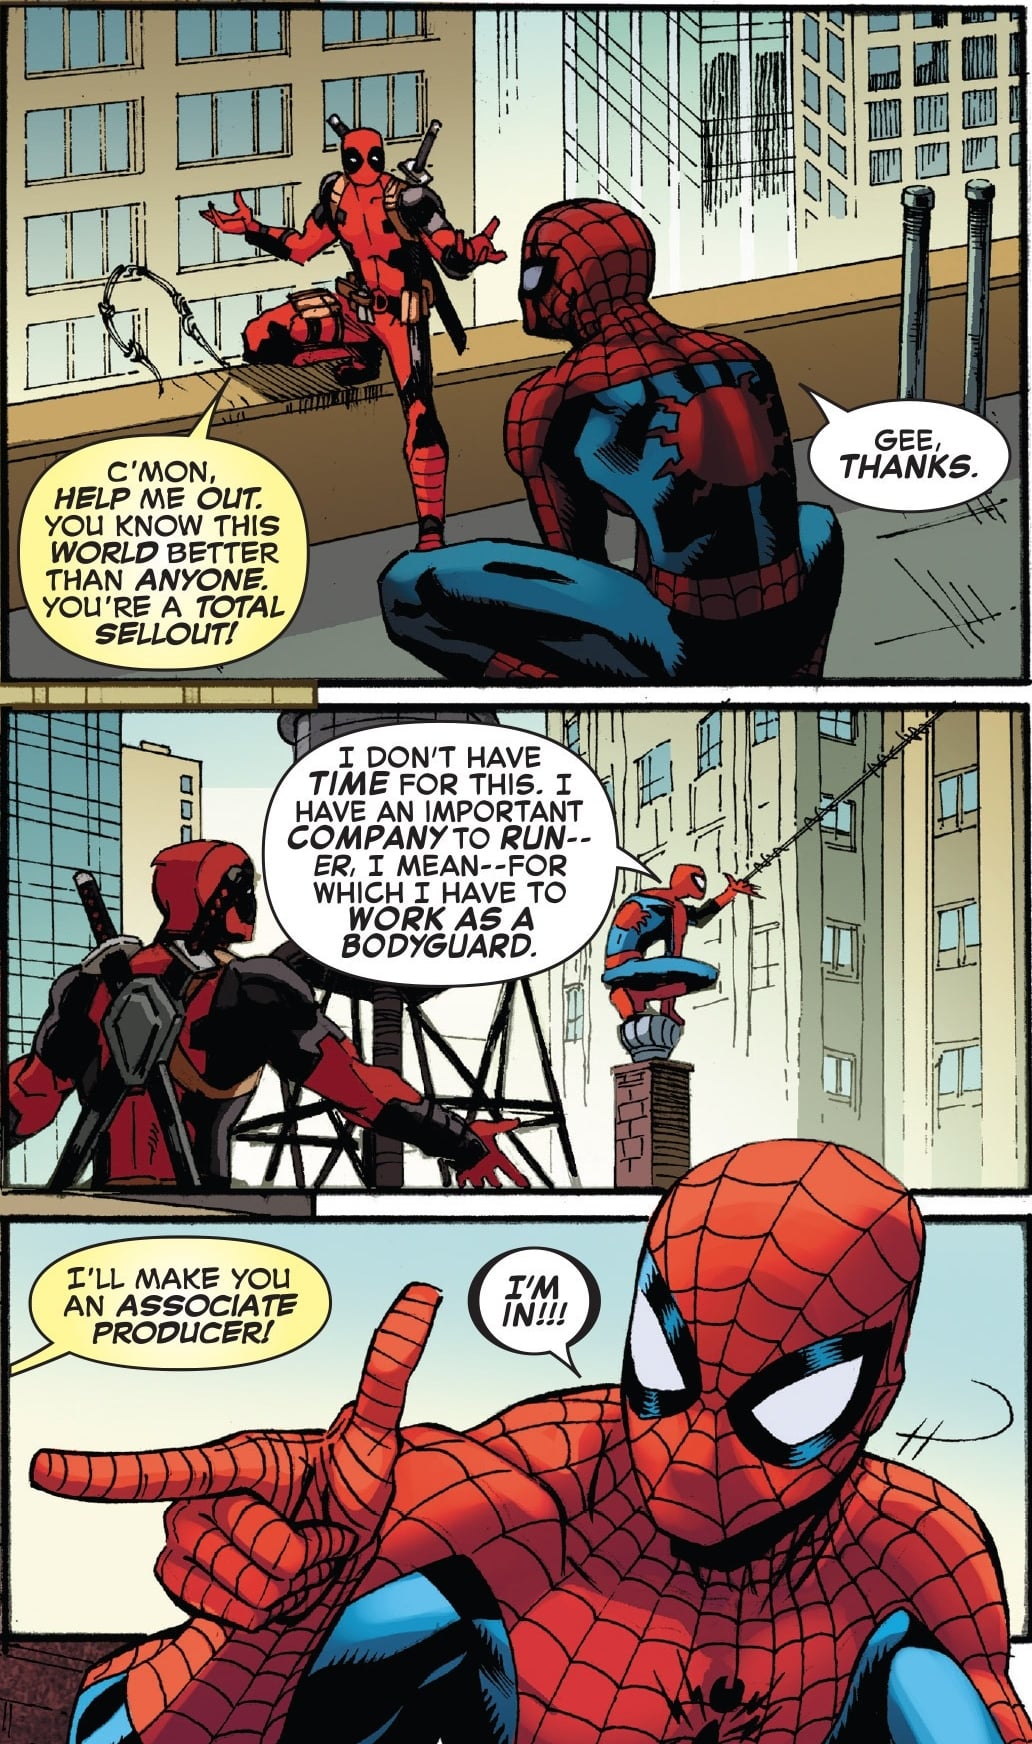 Marvel Calls Out DC In The Pages Of 'Spider-Man/Deadpool' Comic